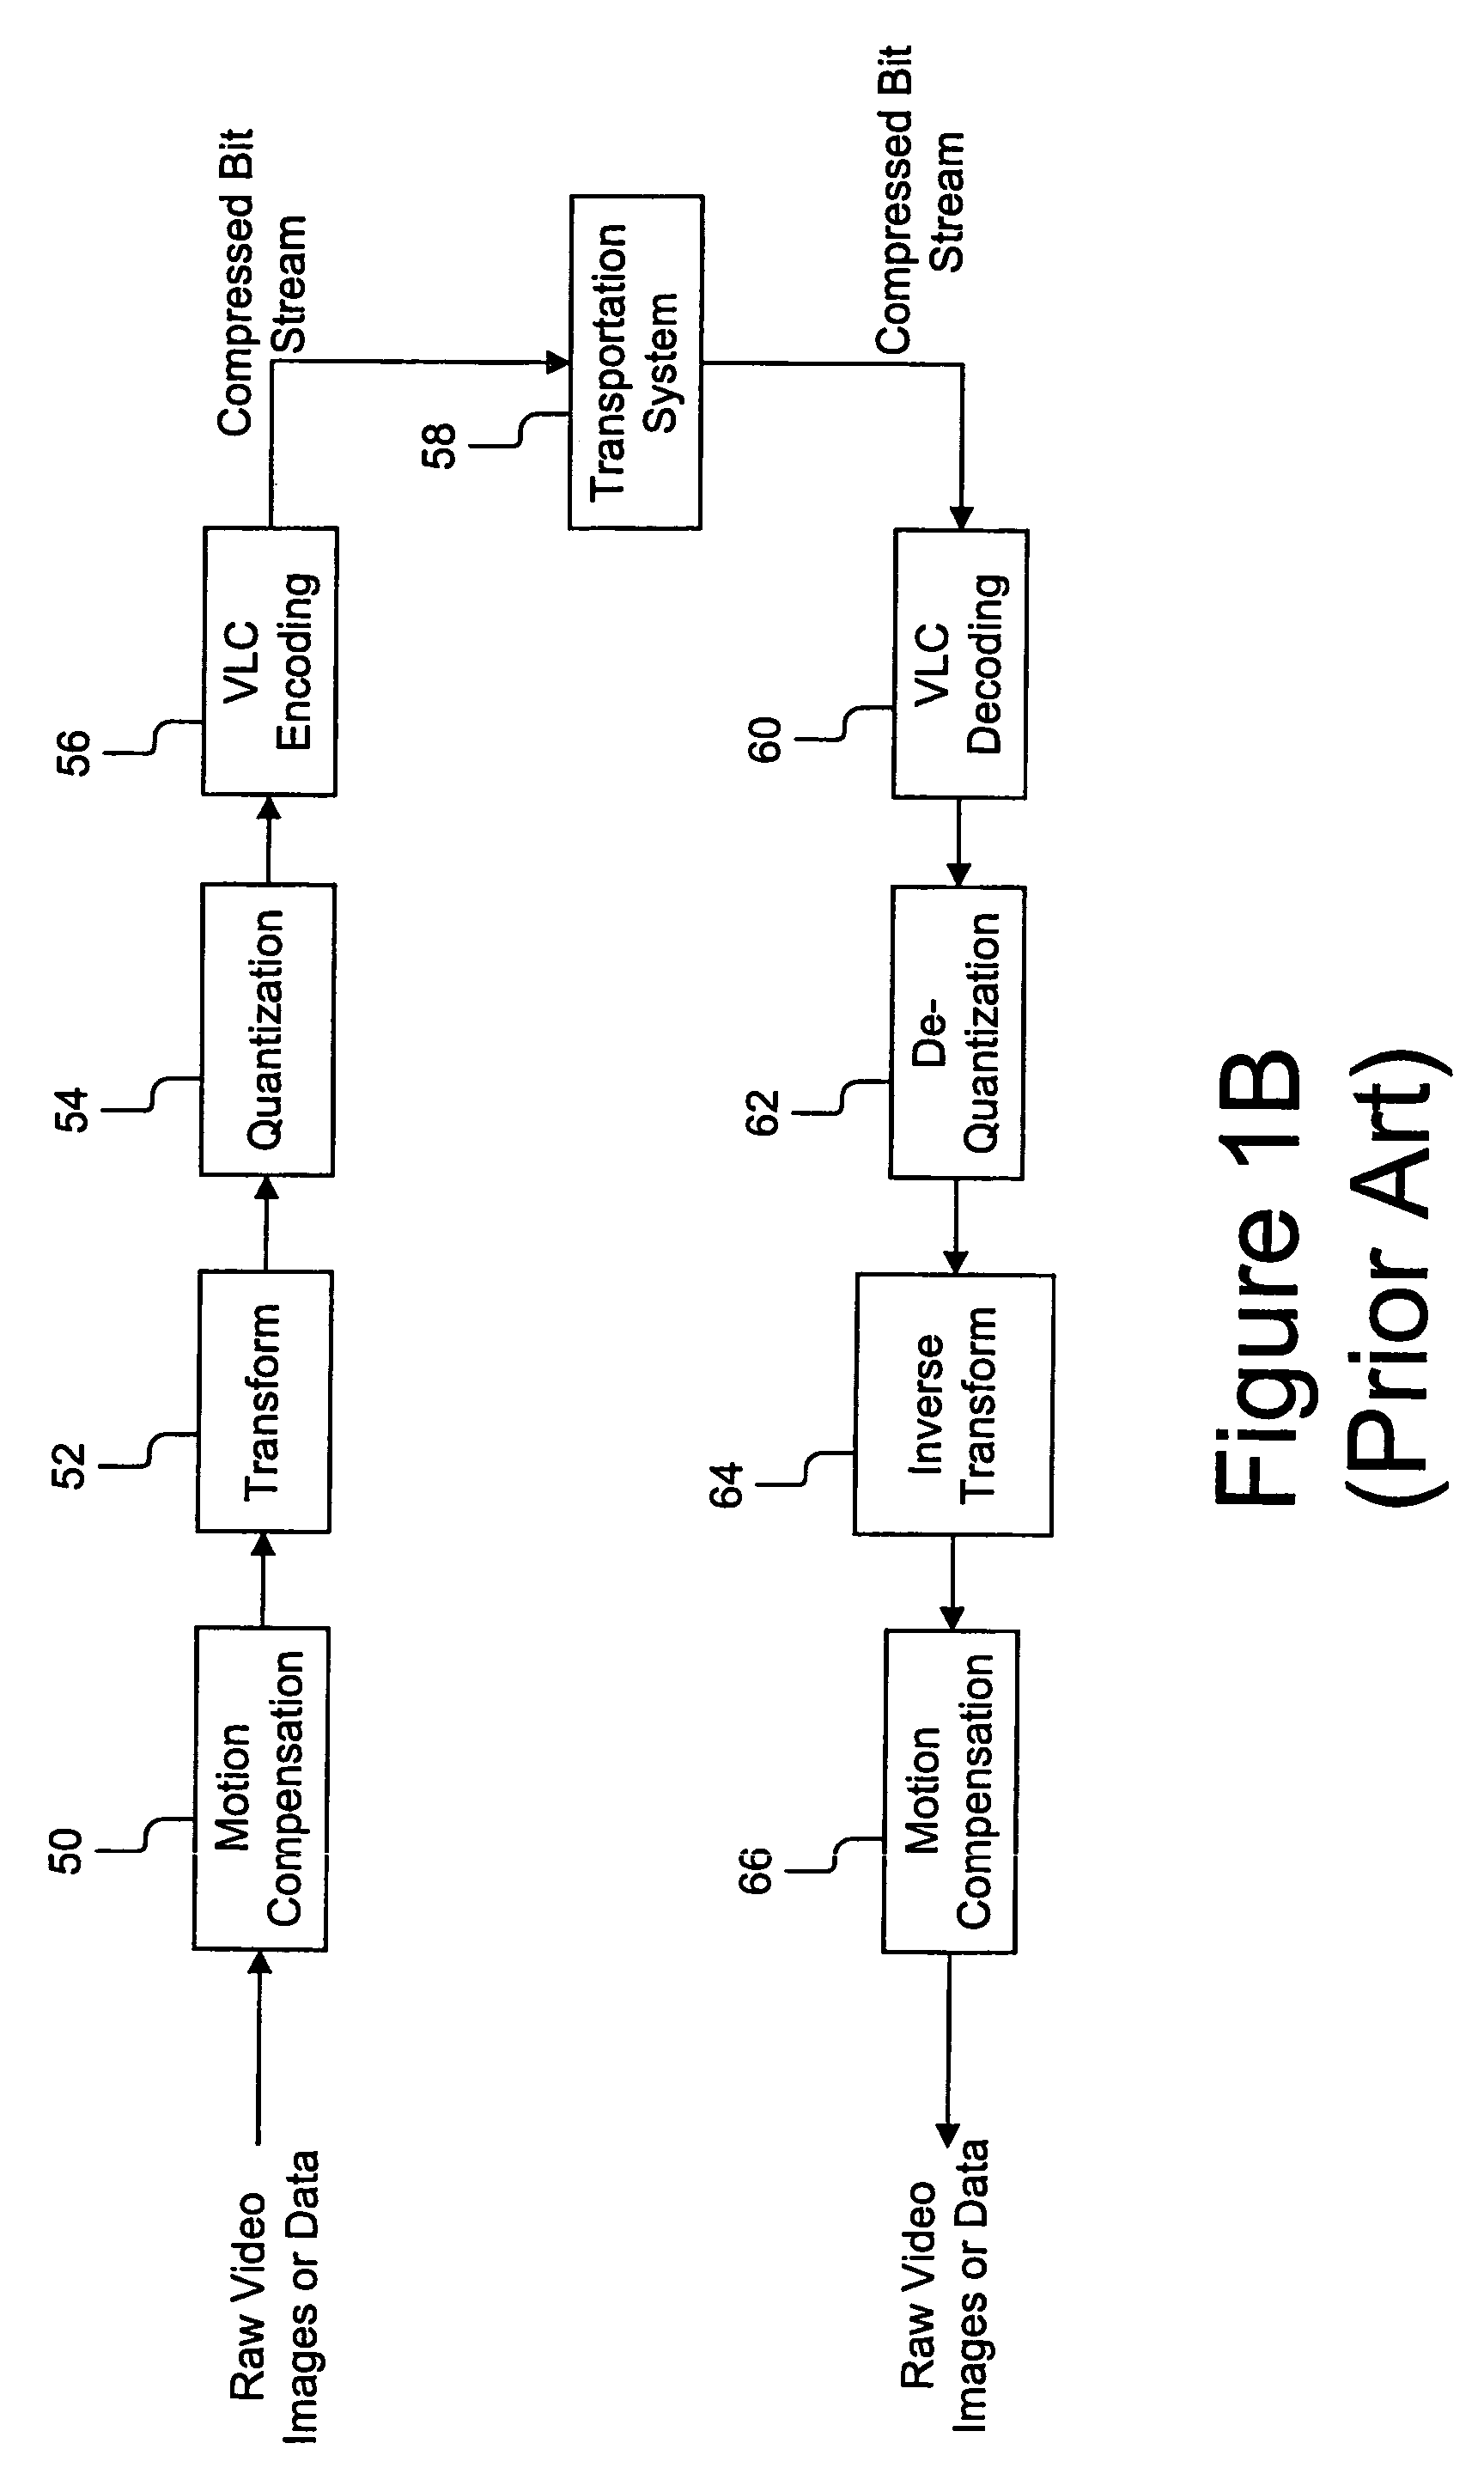 System and method for transporting a compressed video and data bit stream over a communication channel